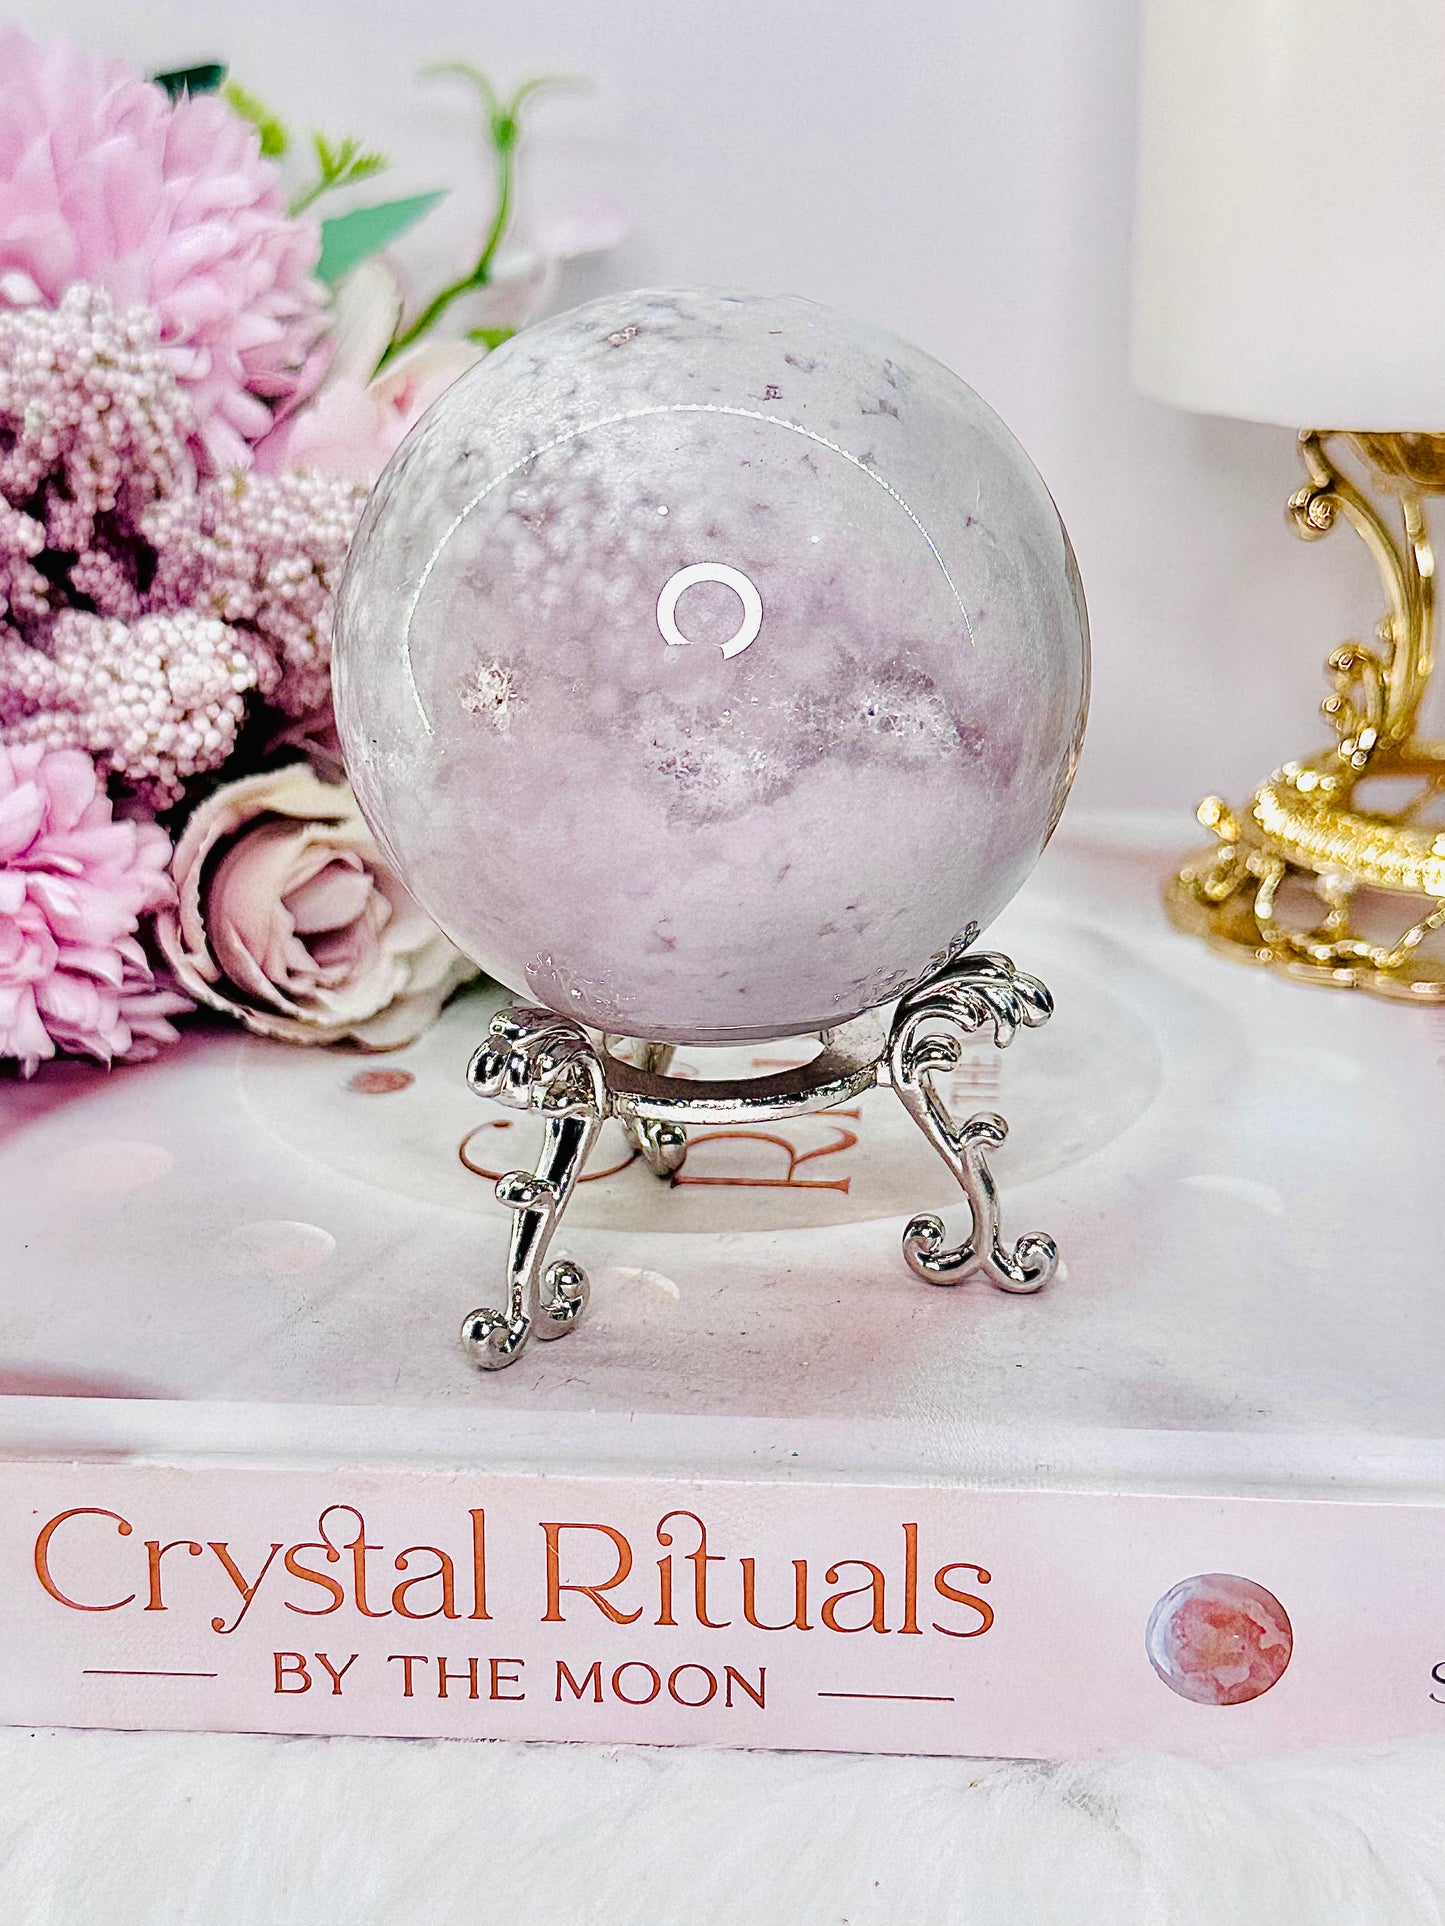 Graceful & Elegant ~ Spectacular 372Gram Druzy Pink Amethyst Sphere on Silver Stand From Brazil (Glass stand in pic is display only)